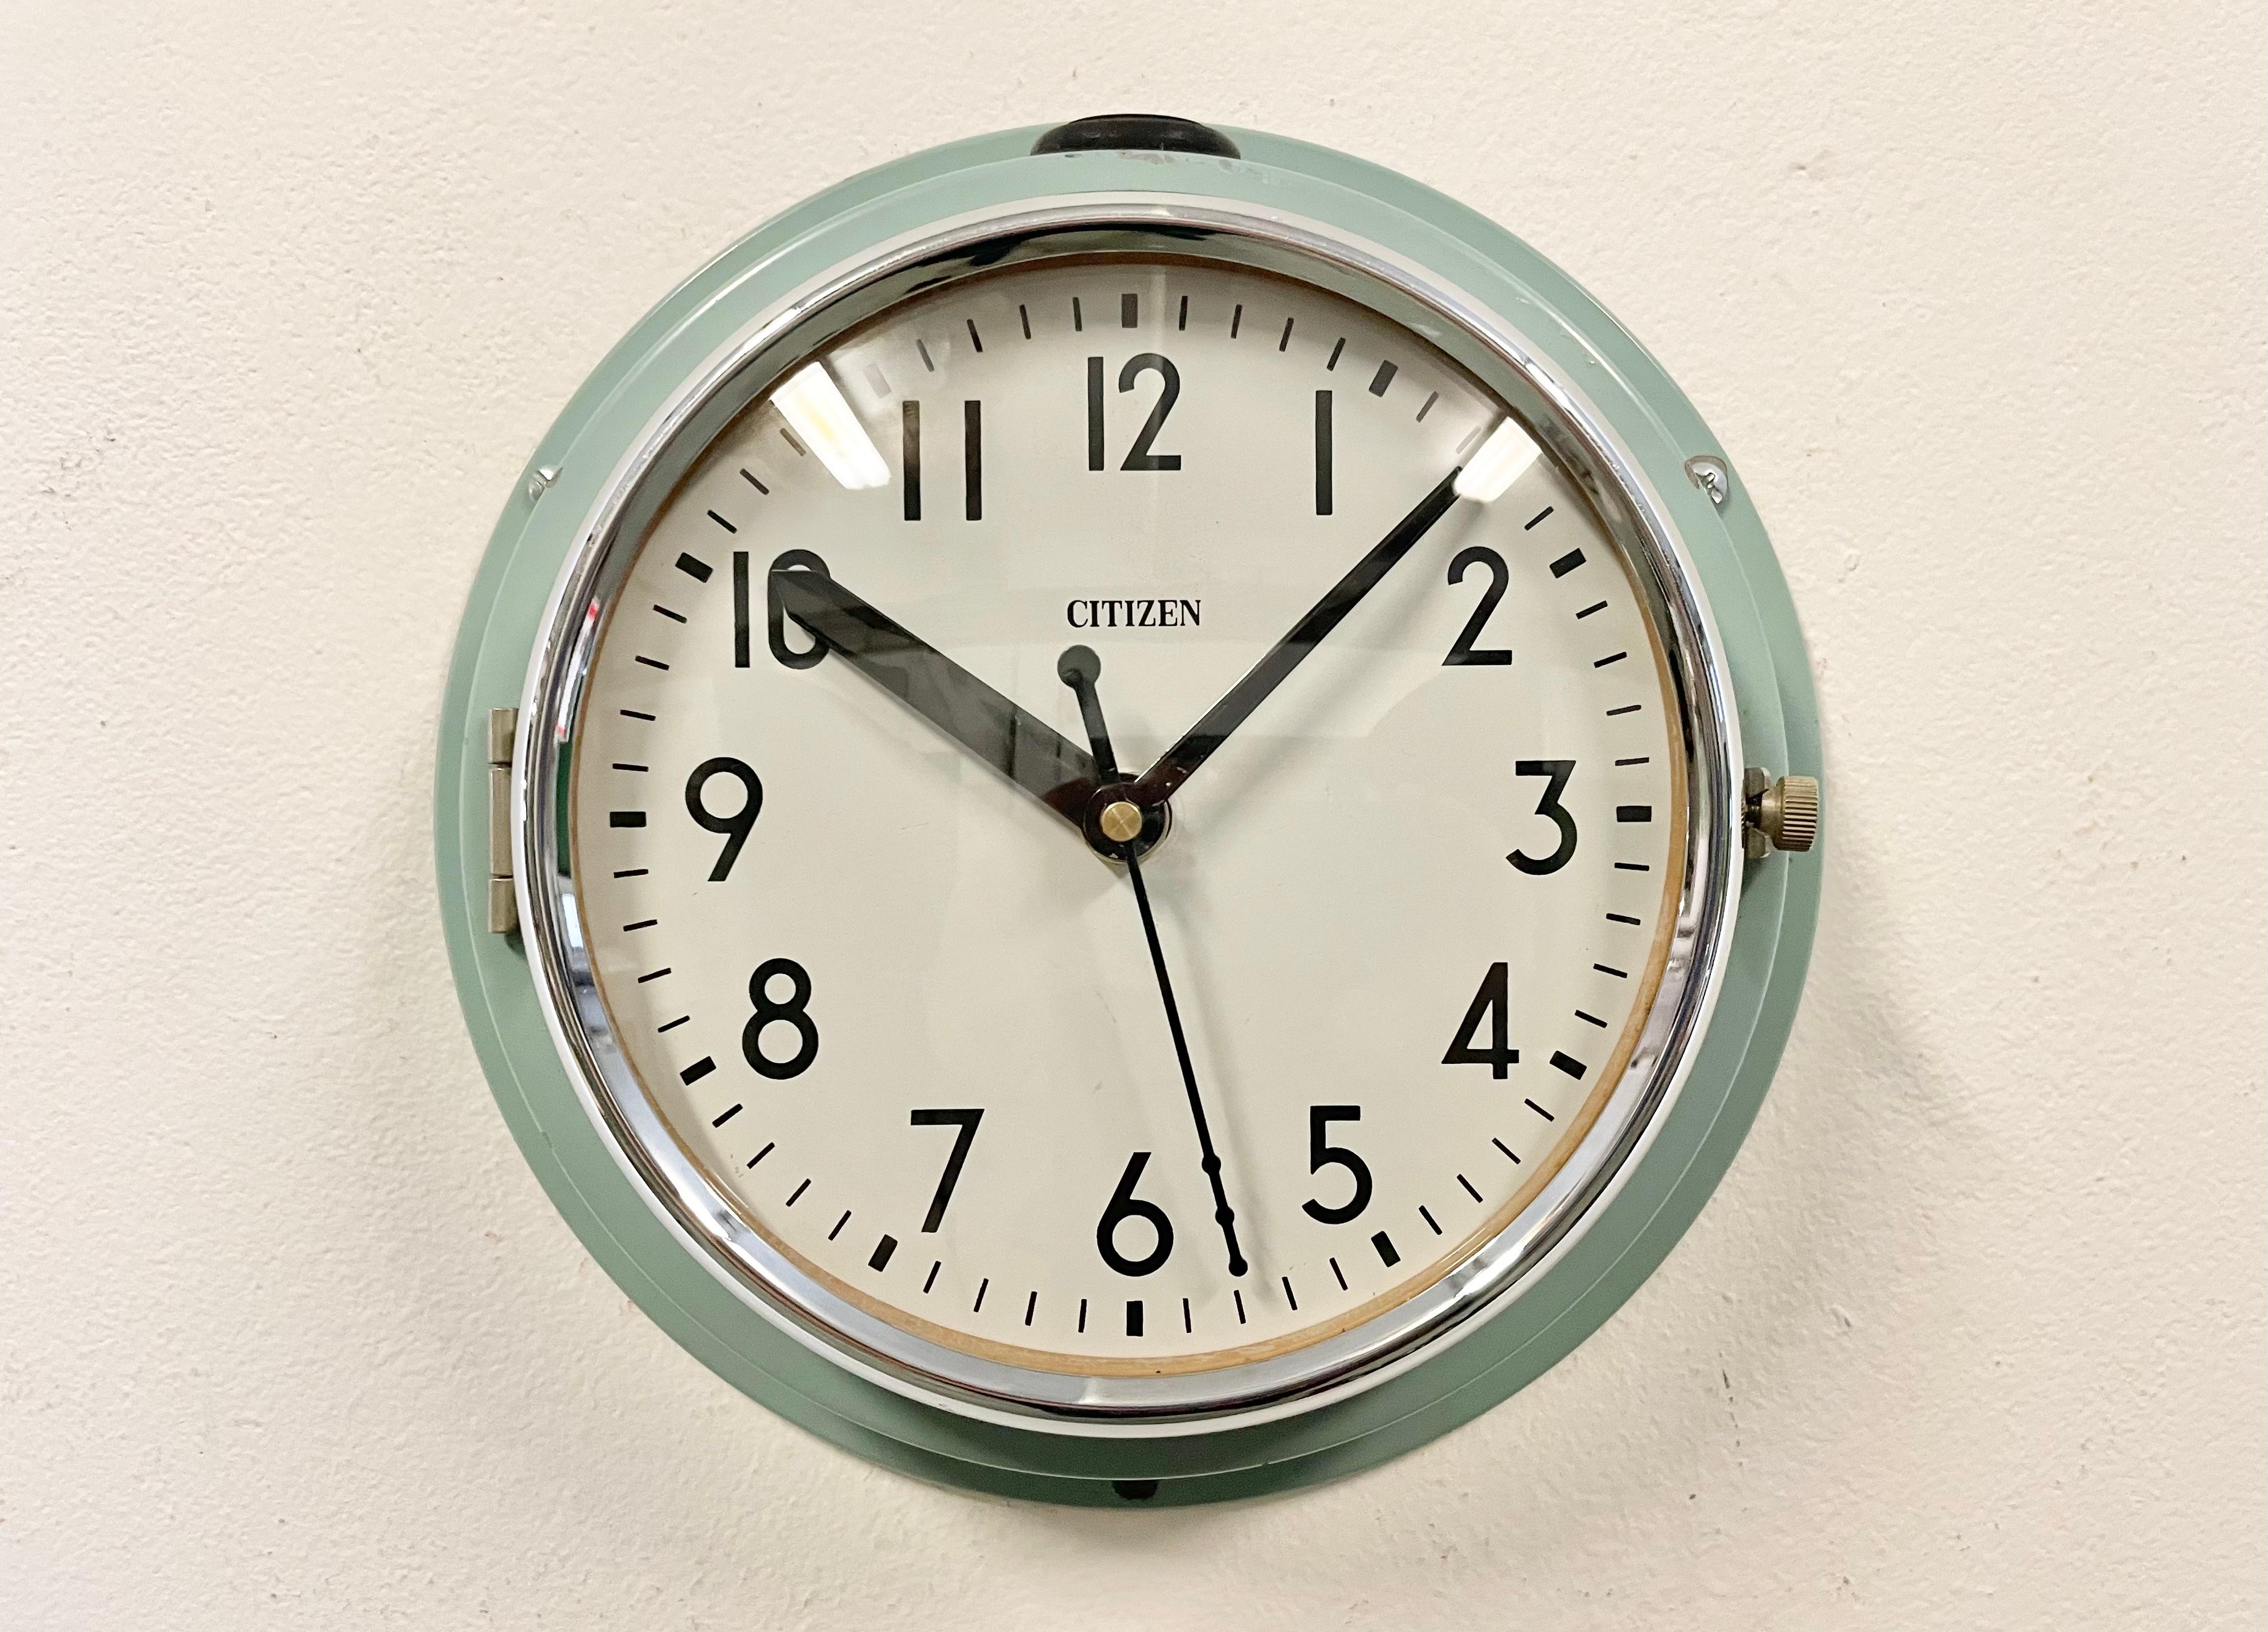 Vintage Citizen navy slave clock designed during the 1970s and produced till 1990s. These clocks were used on large Japanese tankers and cargo ships. It features a light blue metal frame, a plastic dial and curved clear glass cover. This item has